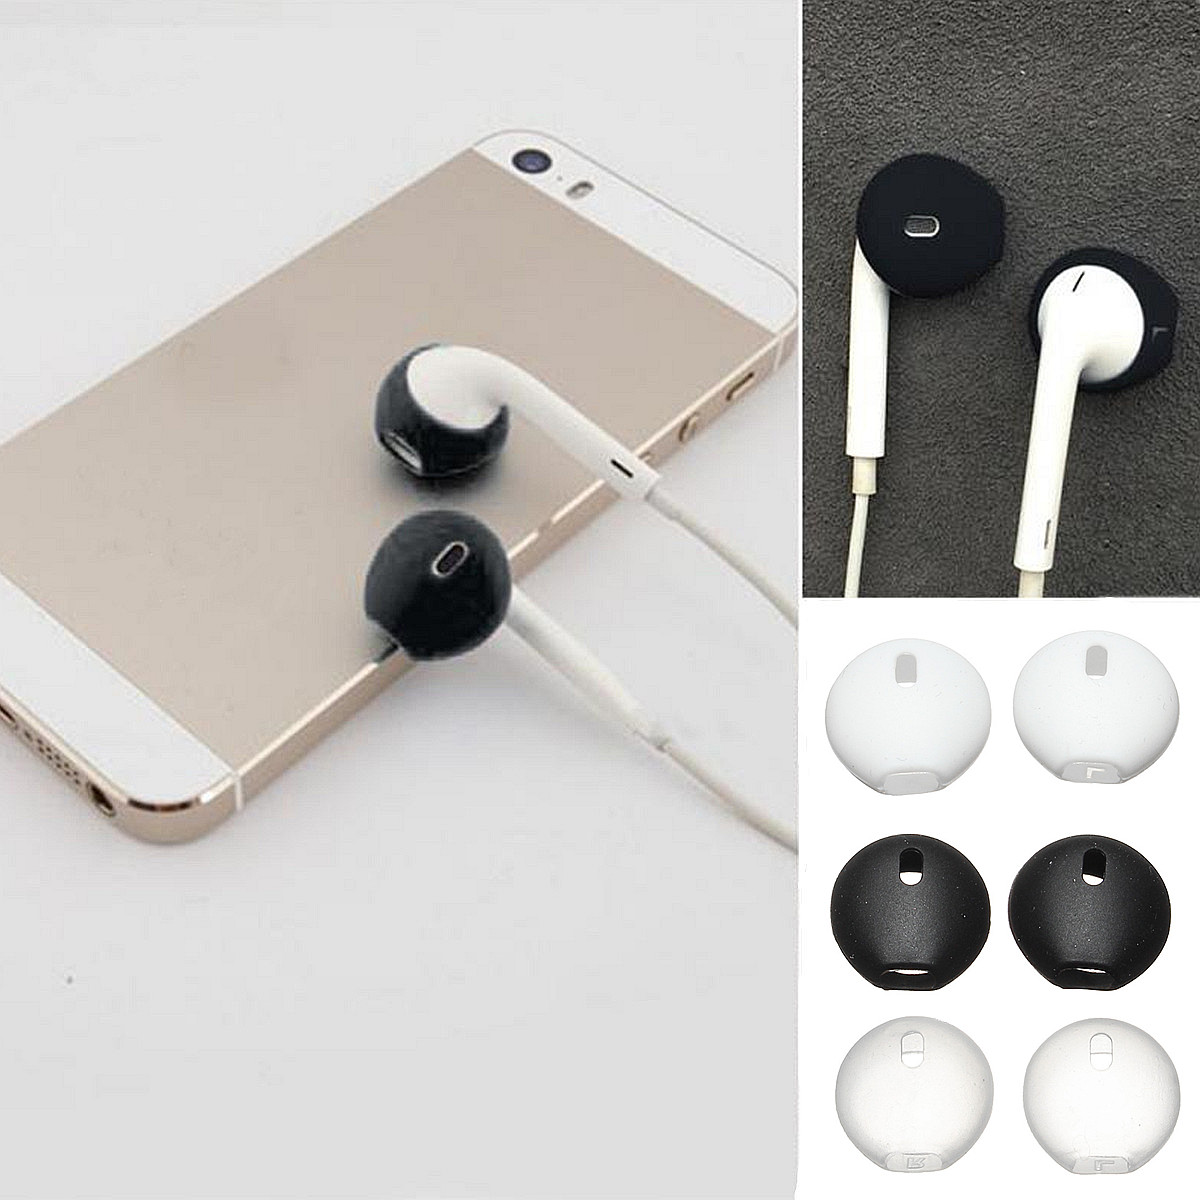 1-Pair-Silicone-In-ear-Headphonee-Earphone-Case-Cover-Cap-Ear-Muffs-for-iPhone-AirPods-EarPods-1131777